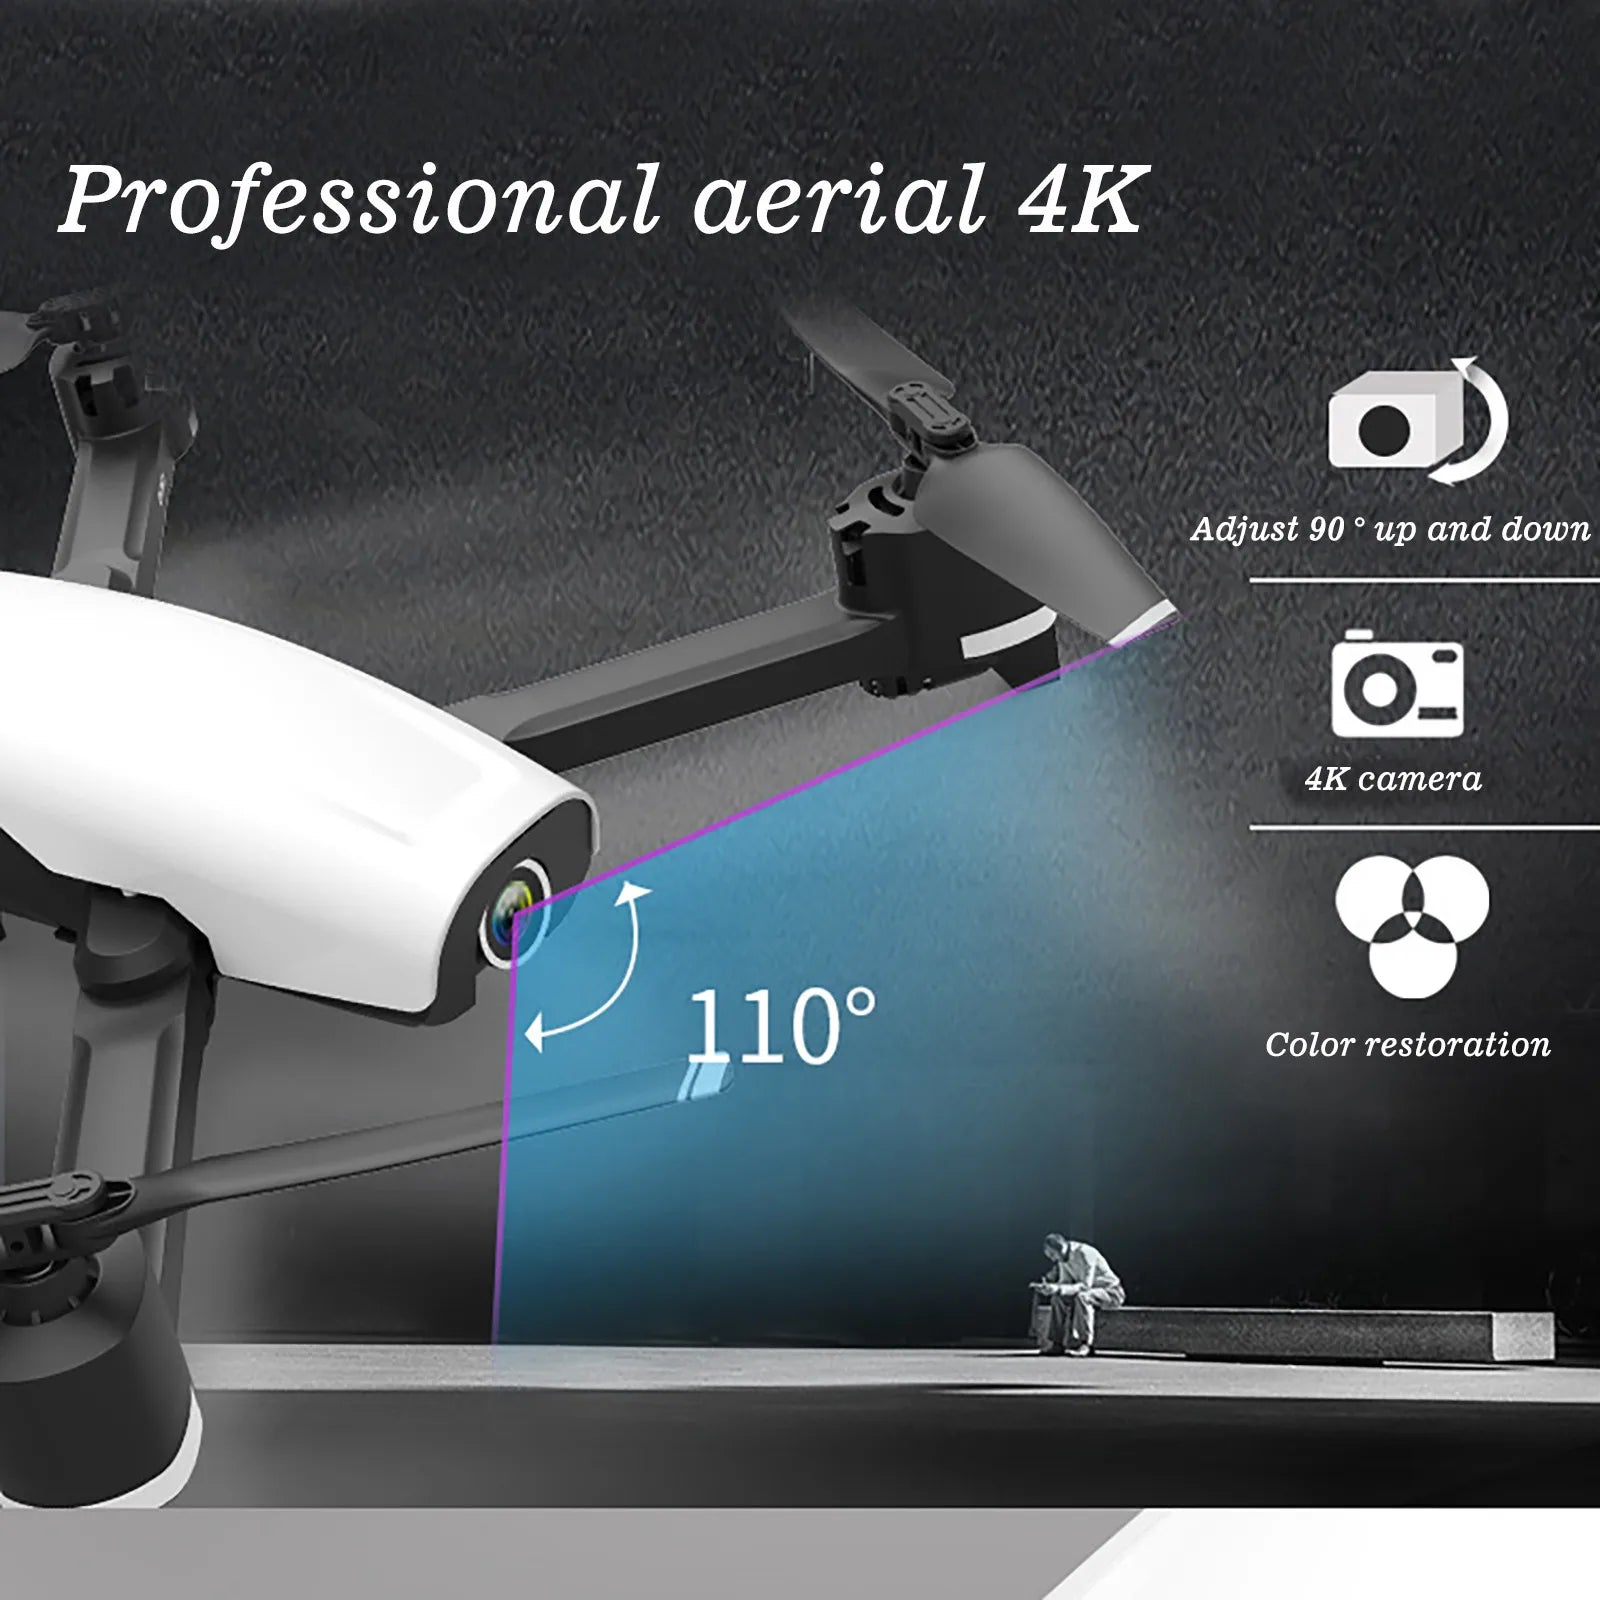 G05 Drone, Professional aerial 4K Adjust 90 up and down 0 4K camera 1109 Color